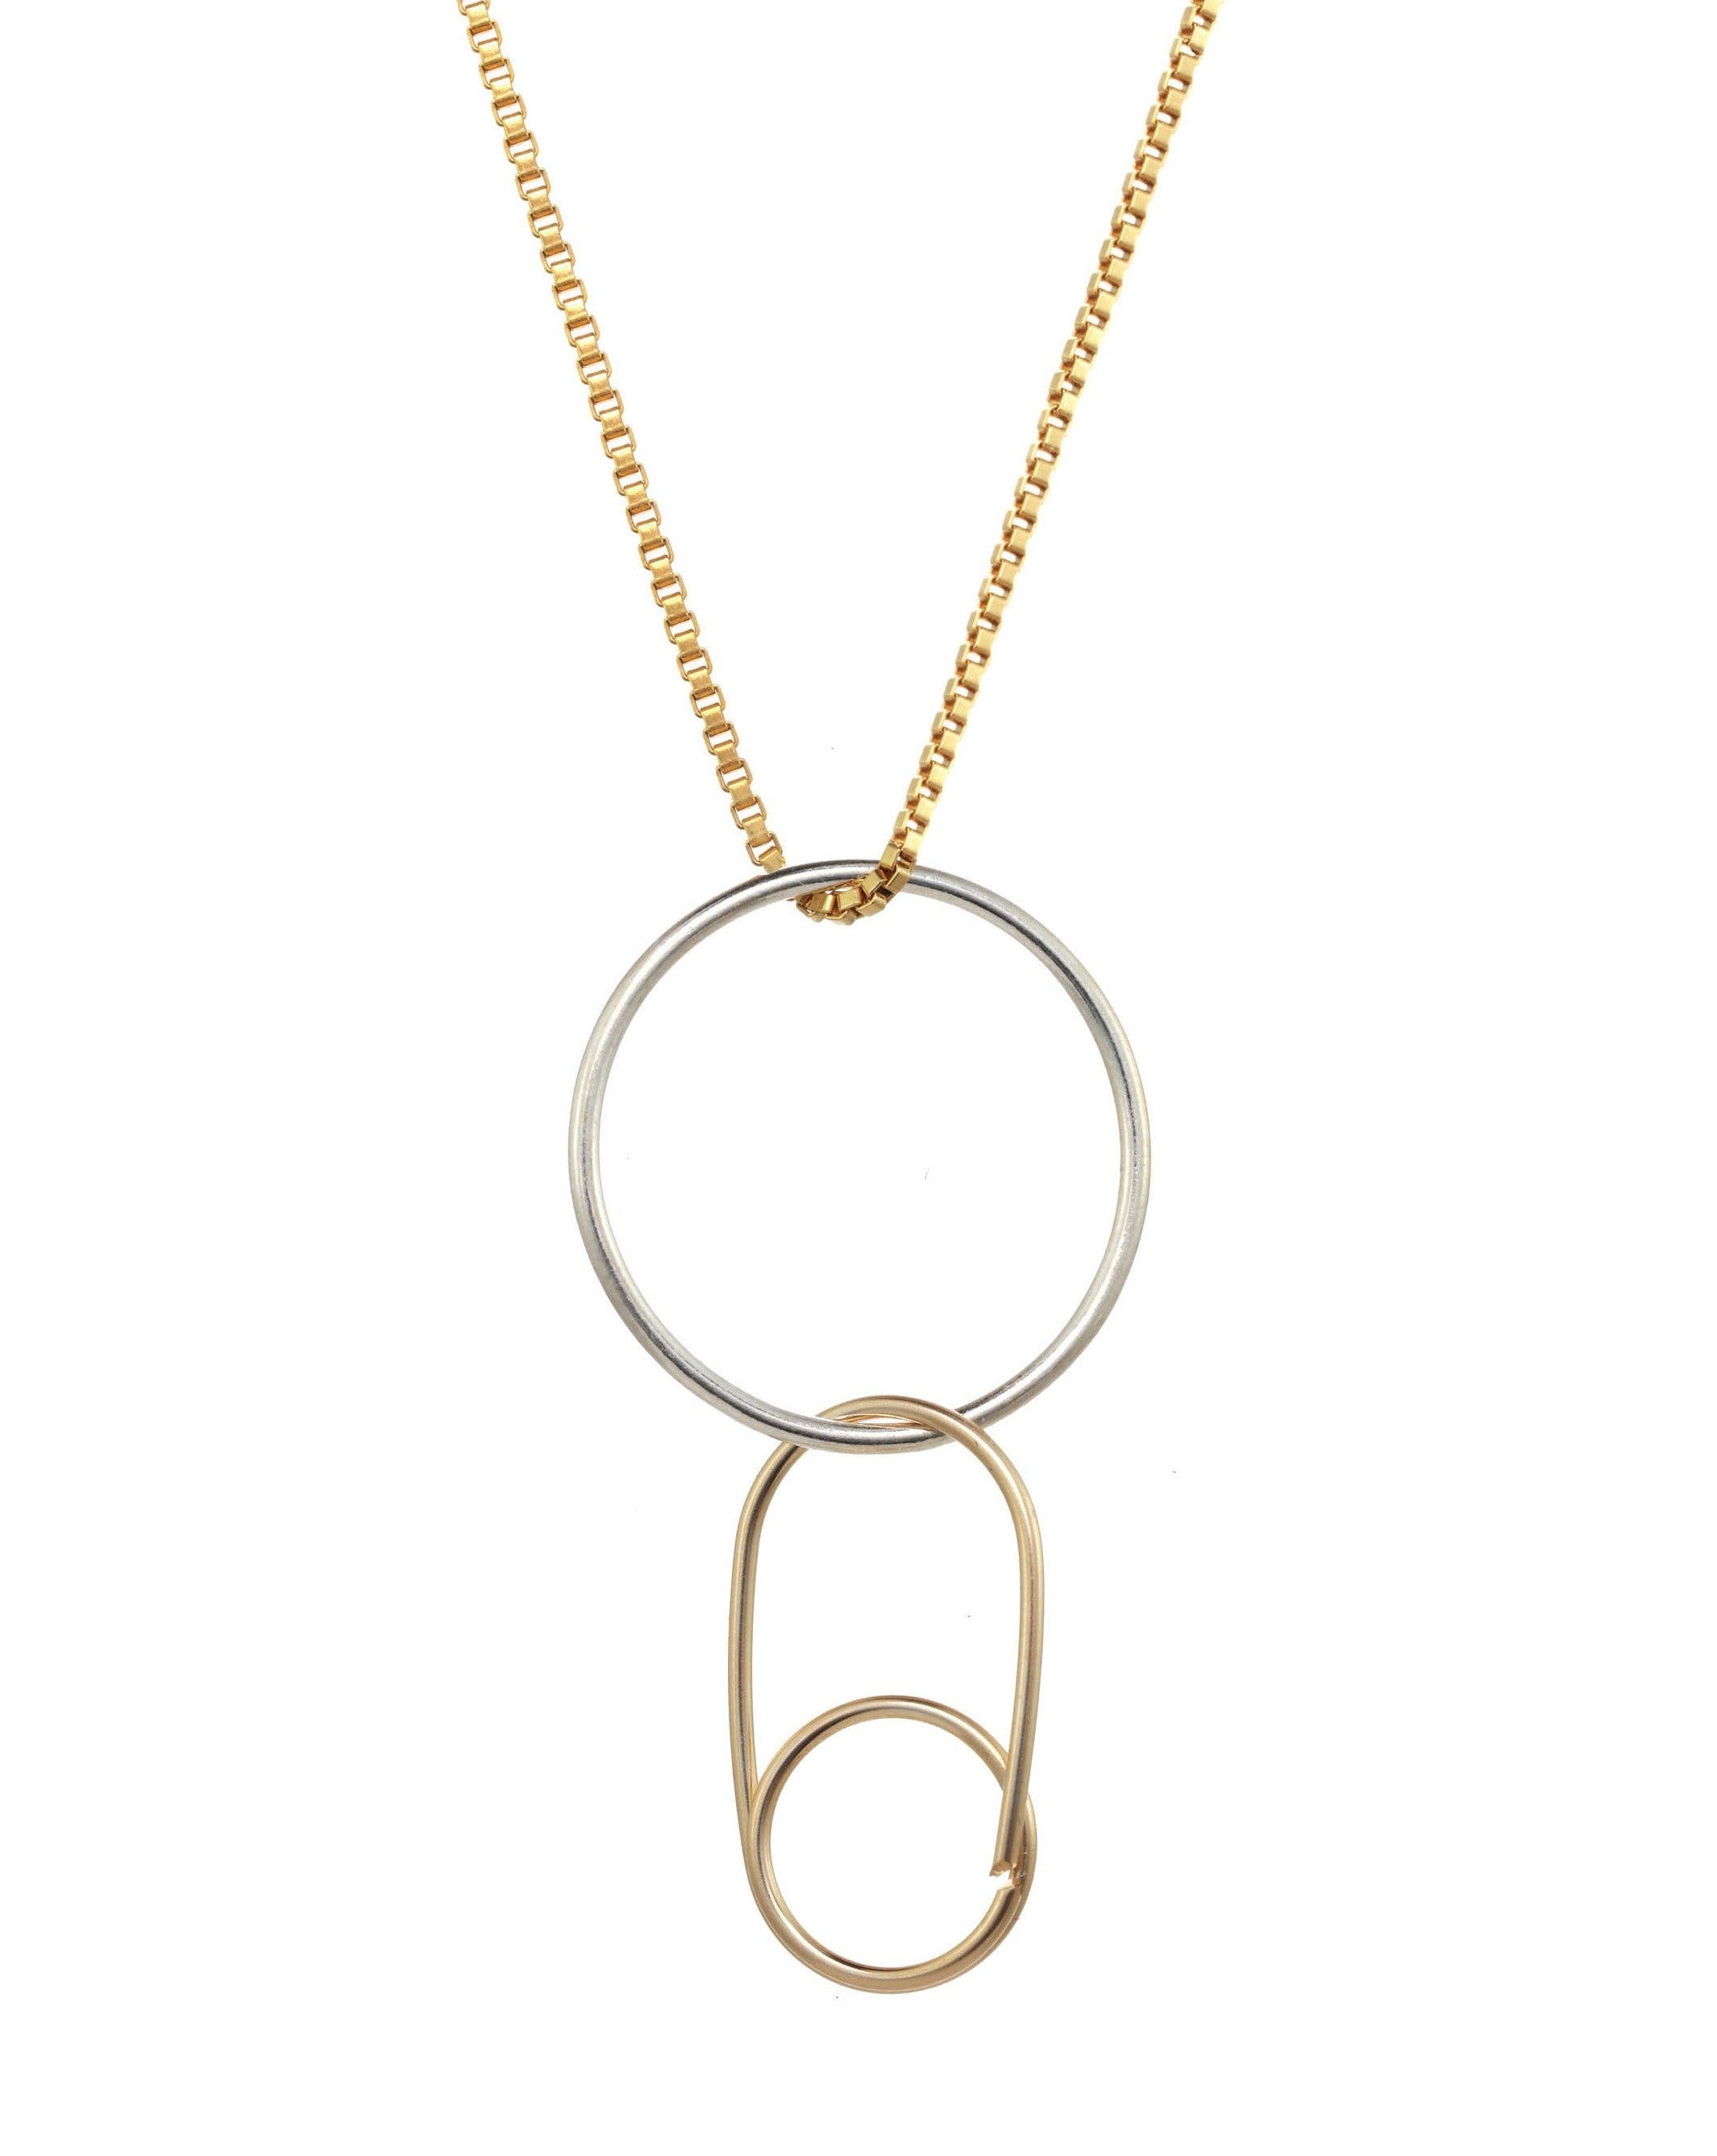 Rina Necklace by KOZAKH. A 16 to 18 inch adjustable length, 1mm box chain necklace, crafted in 14K Gold Filled, featuring a Sterling Silver ring and a hand formed safety pin.